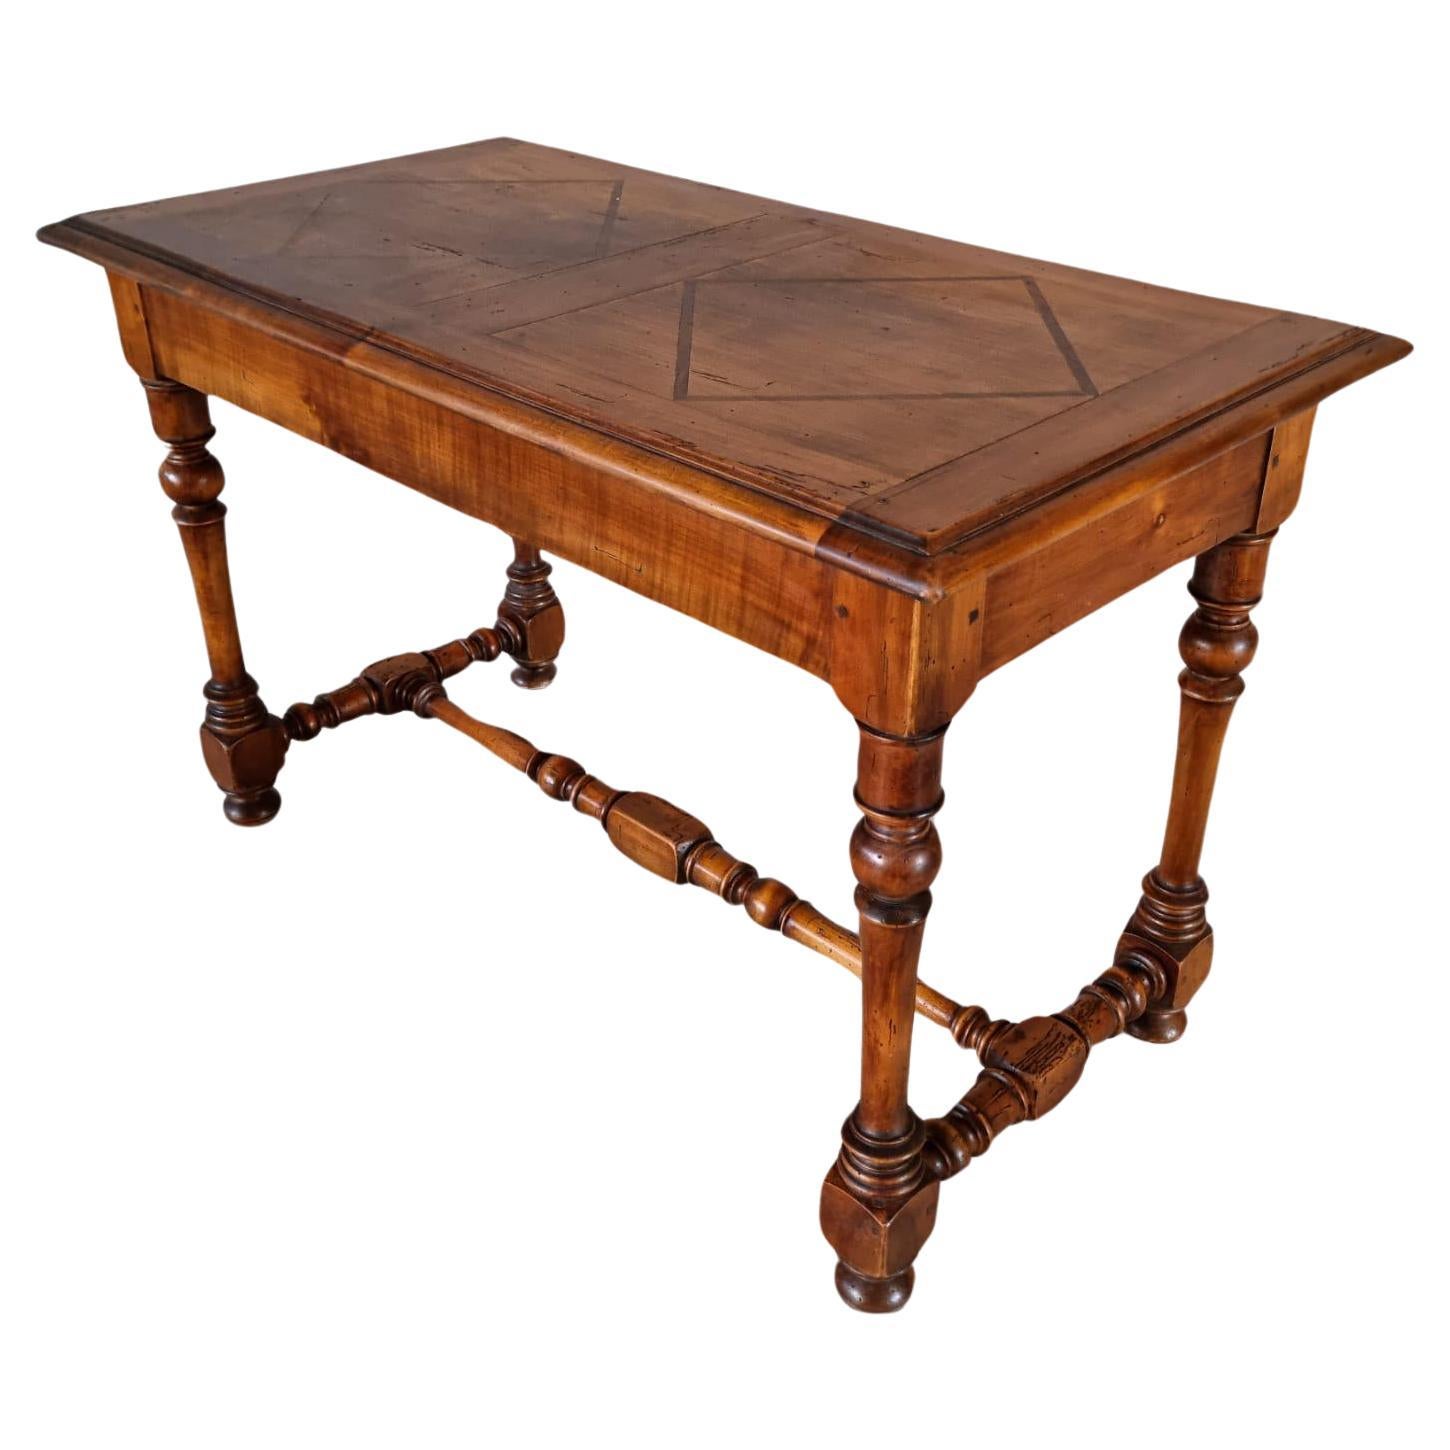 French Provincial Louis XIV Style Carved Walnut Writing Desk or Accent Table